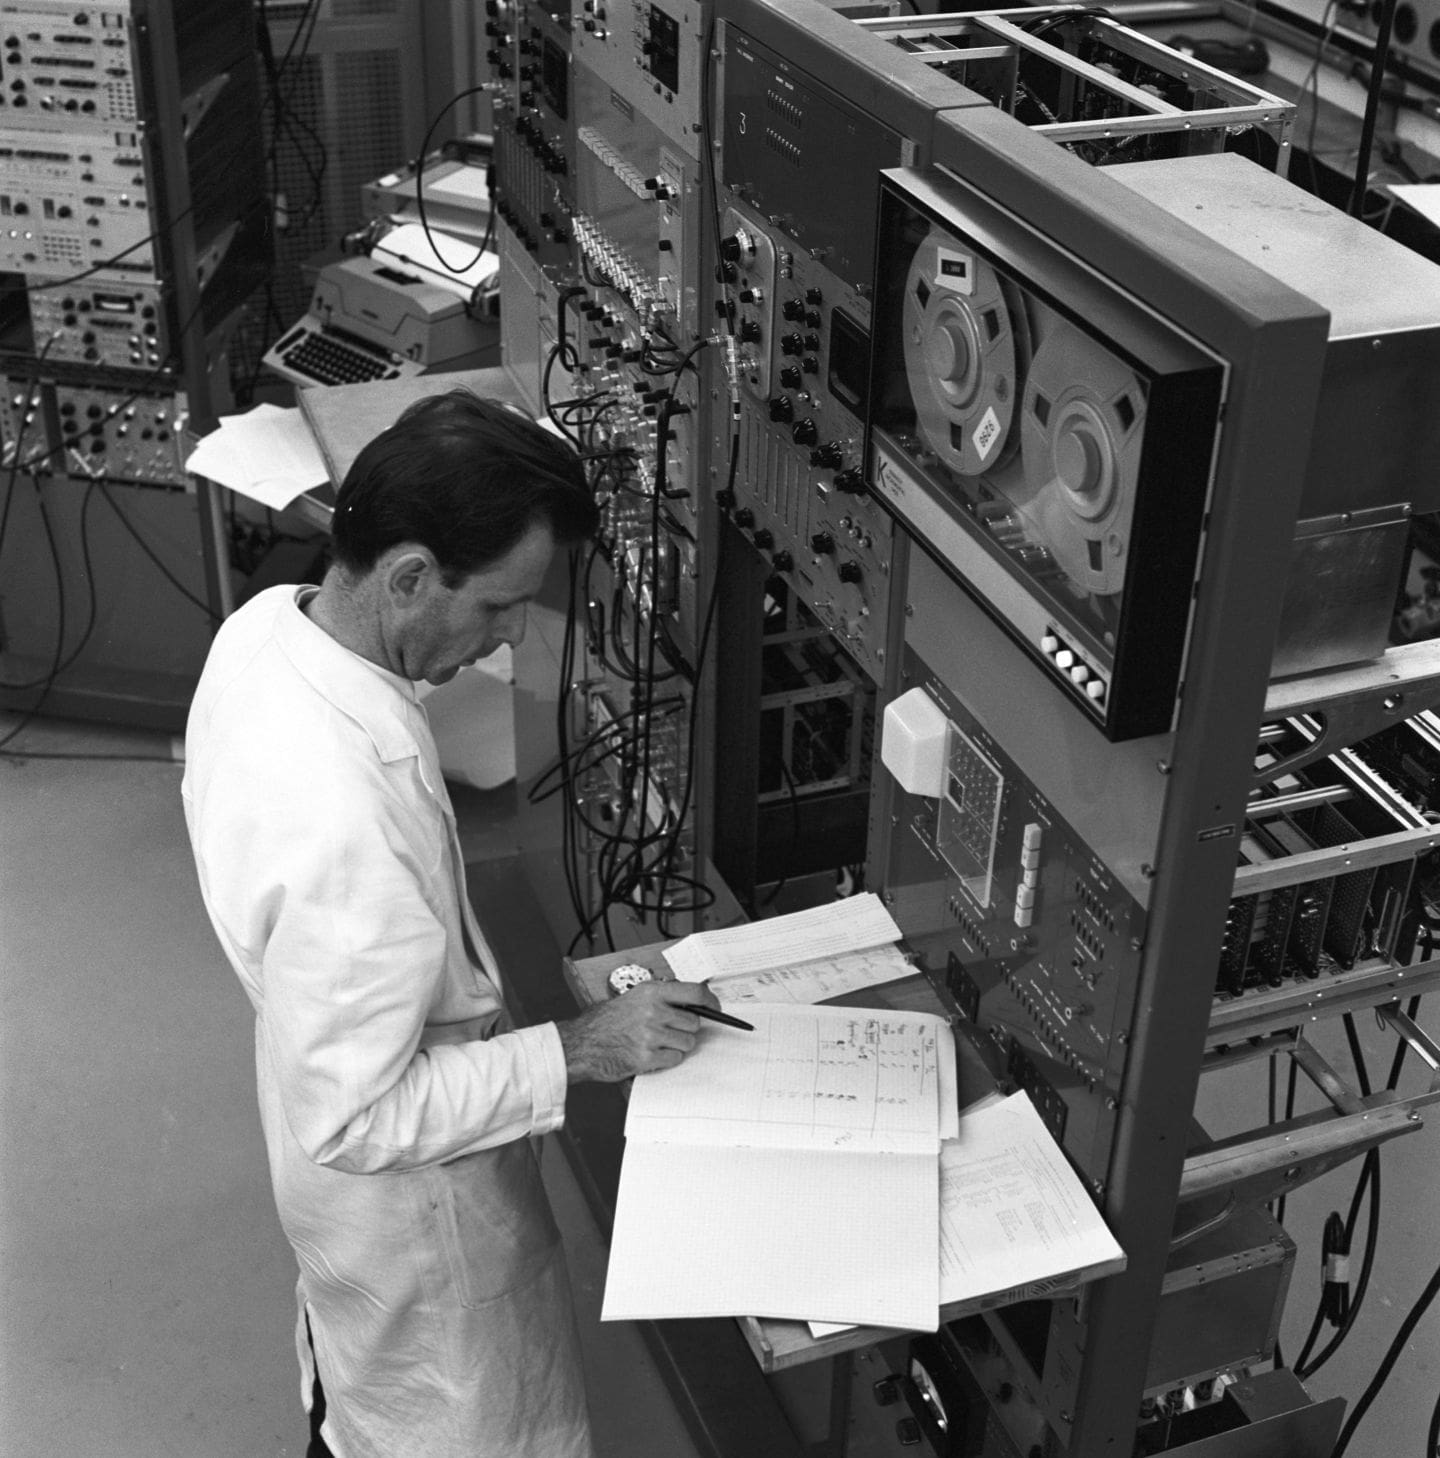 Man in white lab coat writing in a log book surrounded by machines